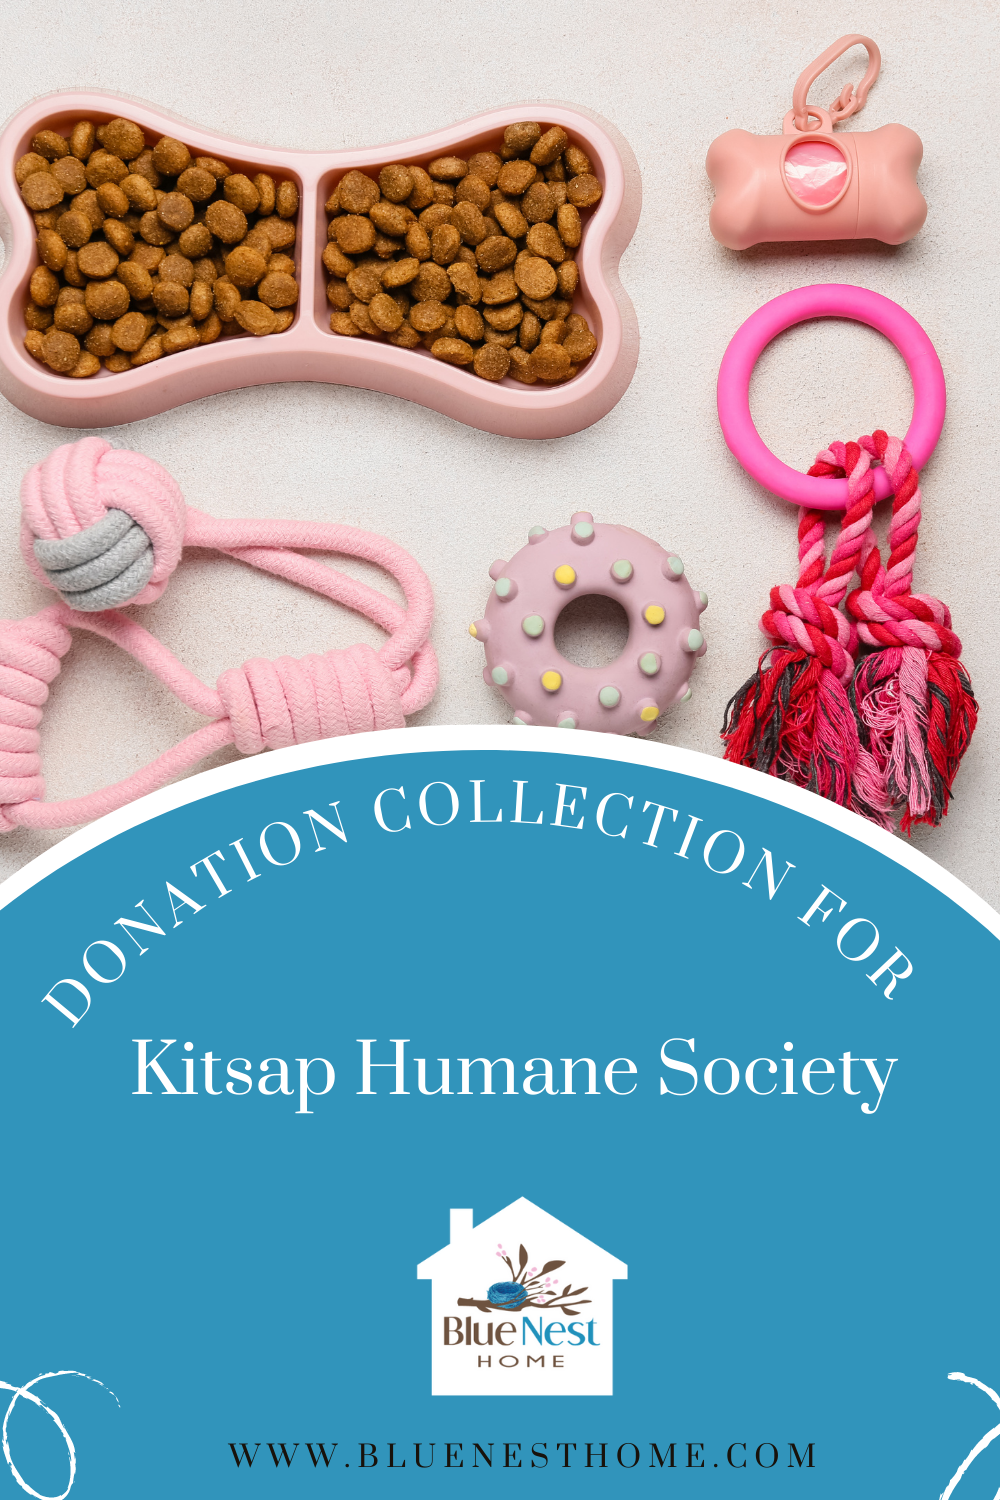 image of pet food and toys with text saying donations for kitsap humane society.